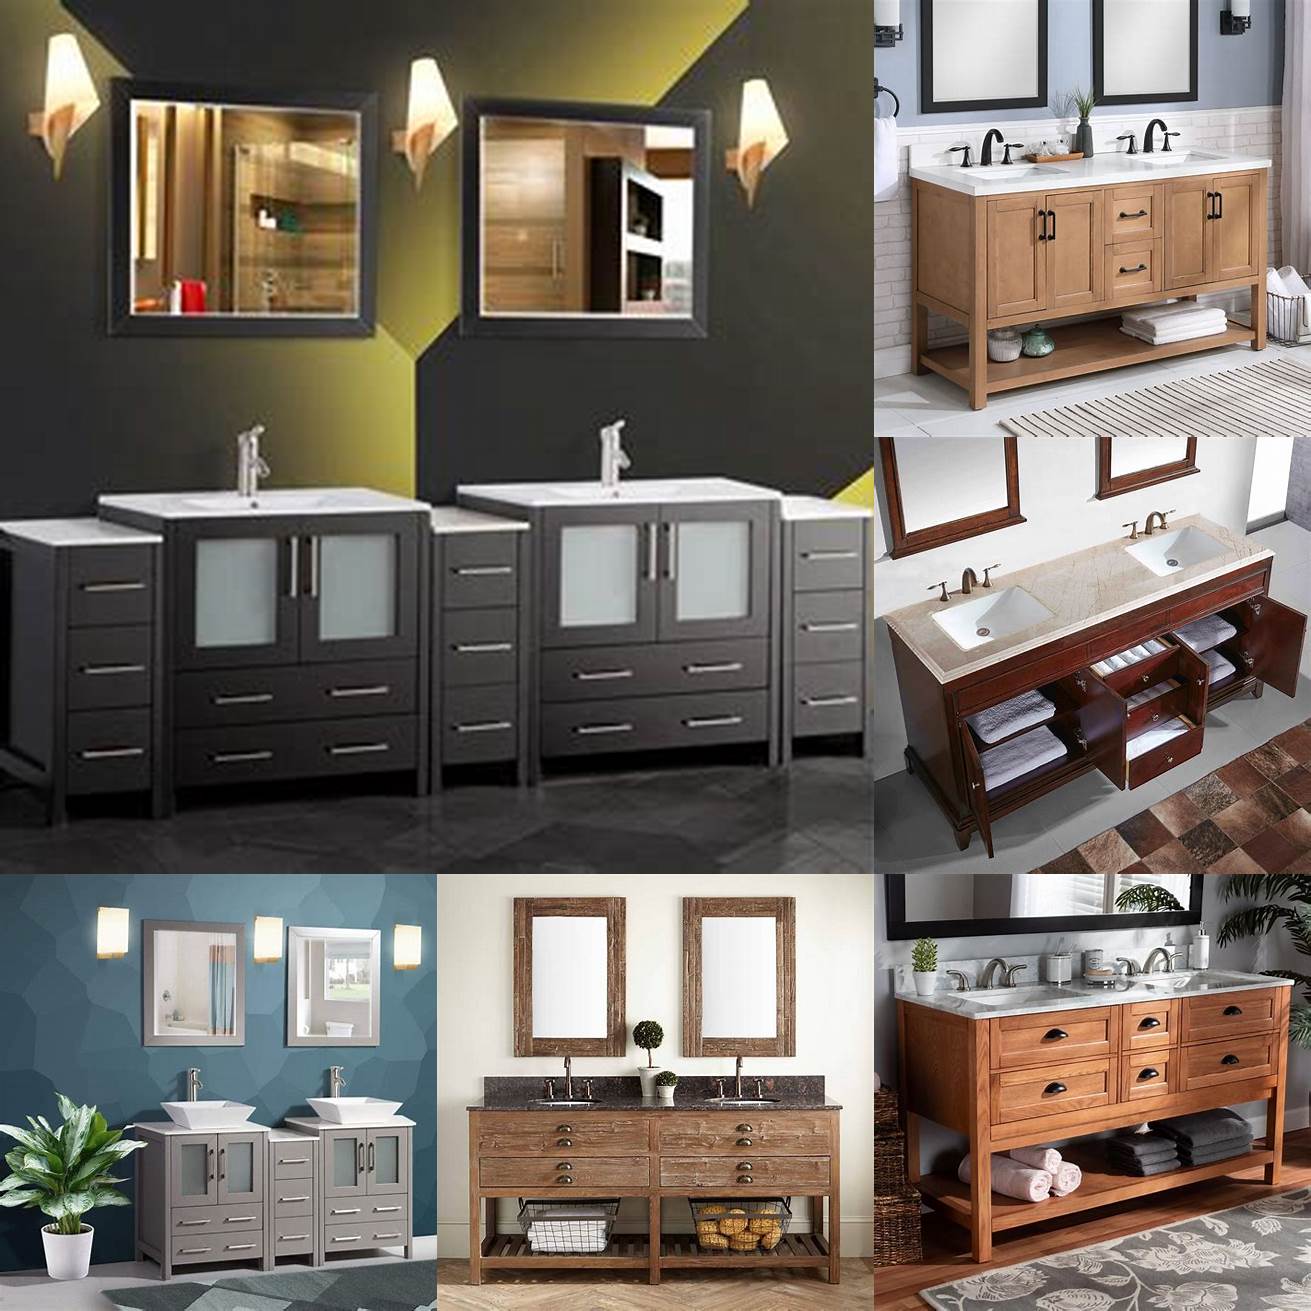 Image of a wood bathroom vanity top with a double sink